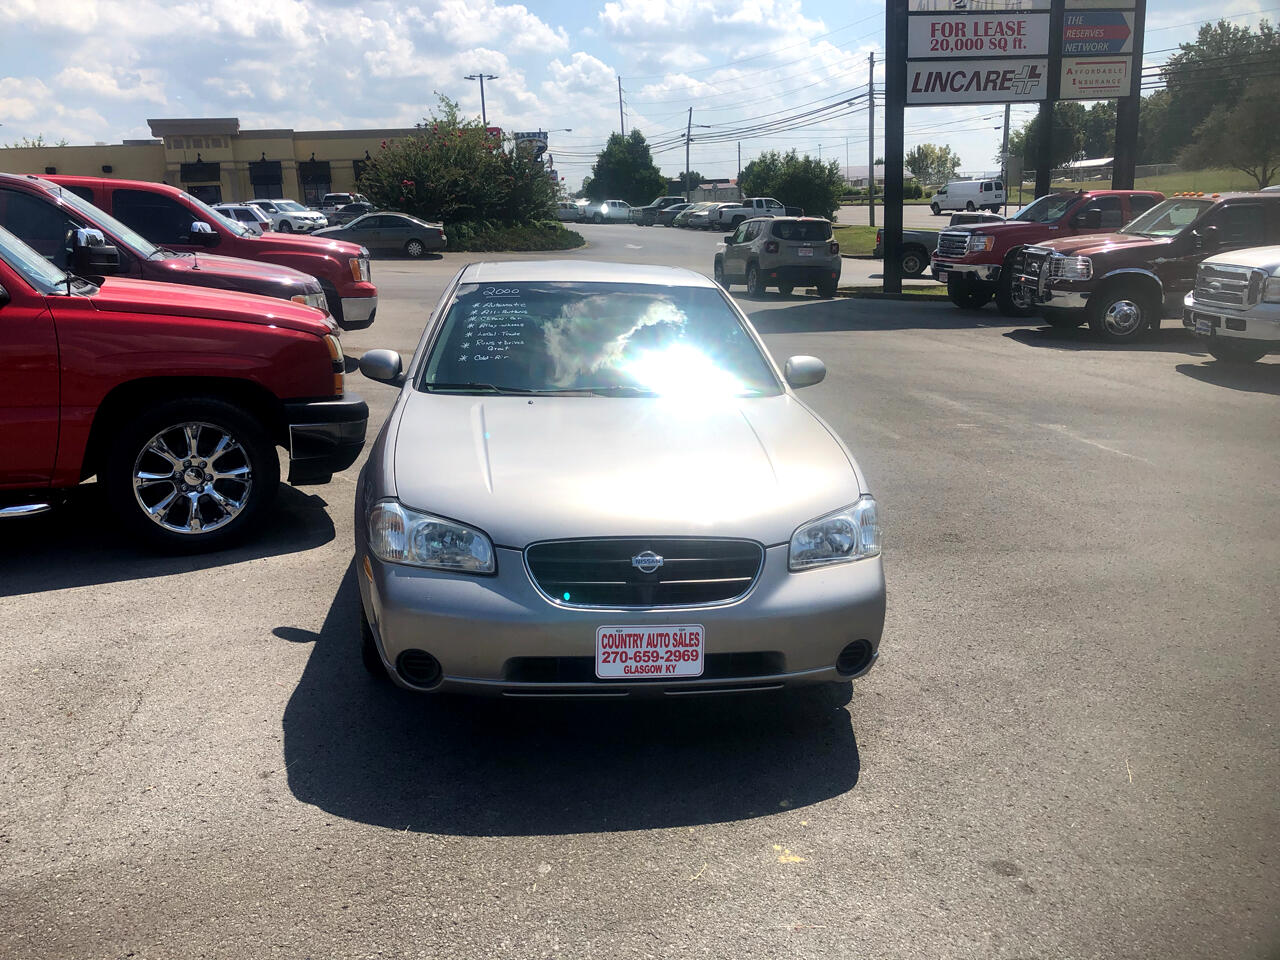 Used 2000 Nissan Maxima Gle For Sale In Glasgow Ky 42141